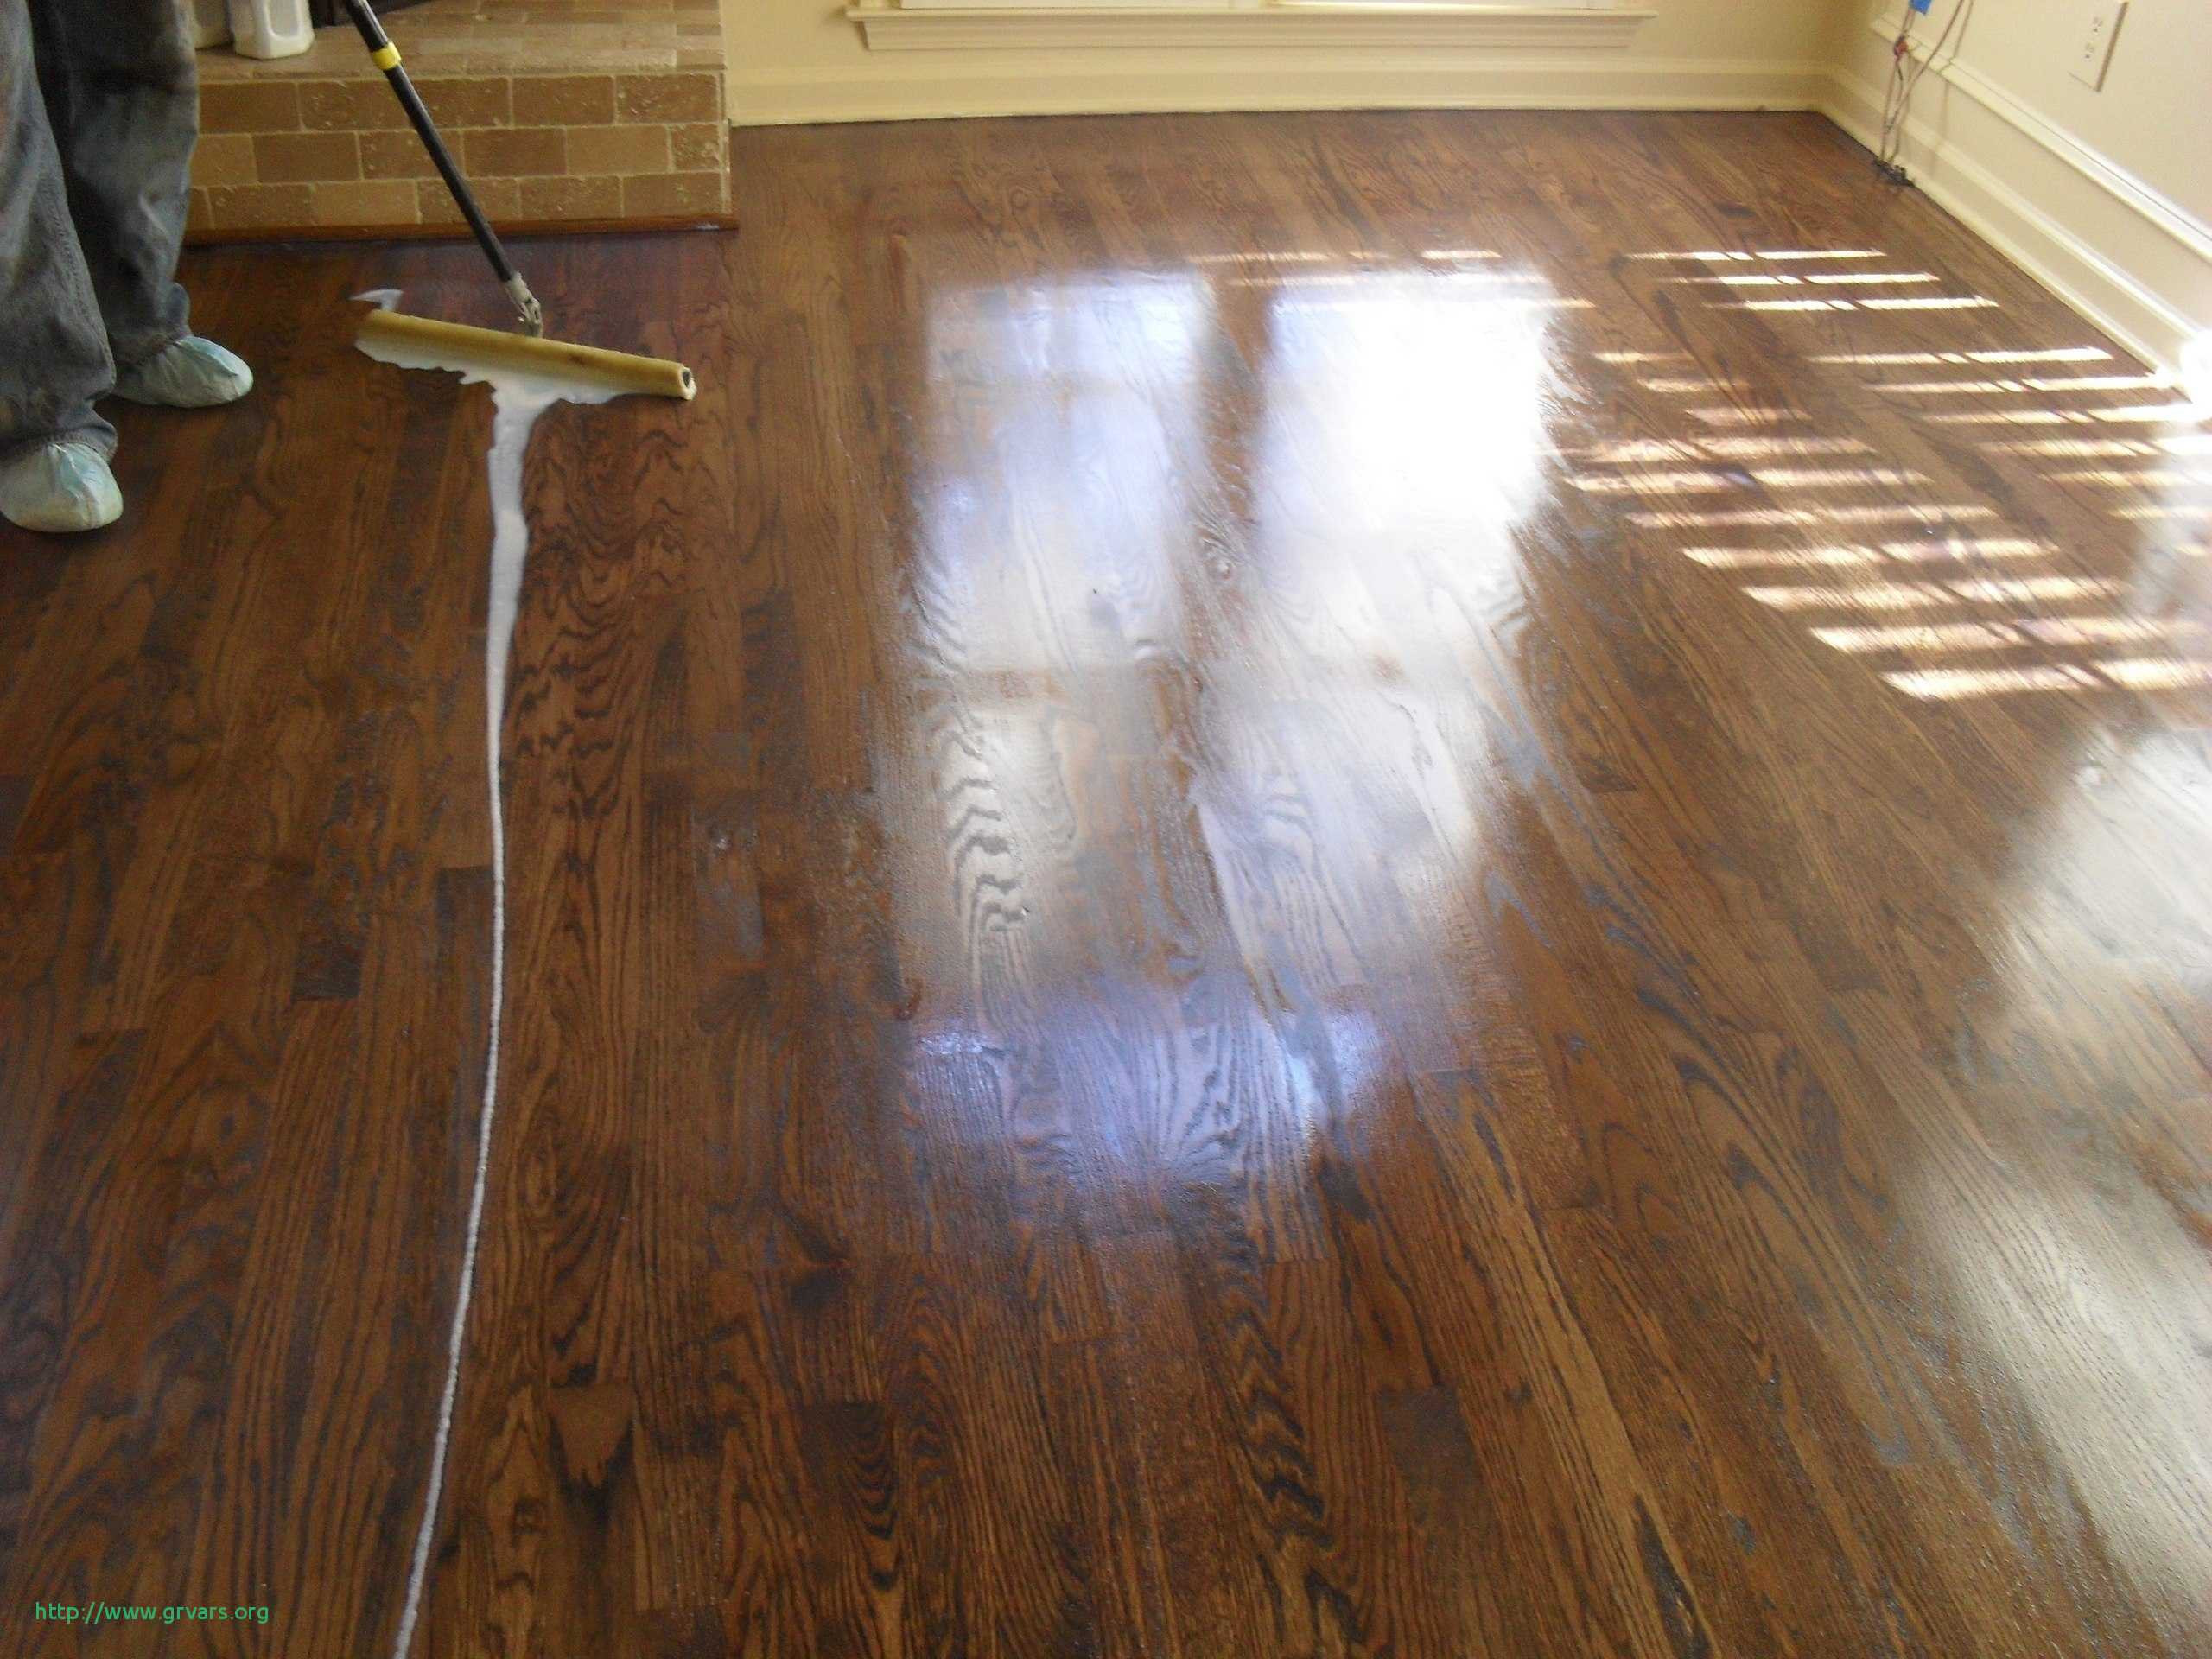 16 Amazing Hardwood Floor Refinishing Vs Resurfacing 2024 free download hardwood floor refinishing vs resurfacing of image number 6563 from post restoring old hardwood floors will with regard to nouveau hardwood floors yourself ideas restoring old will inspirant